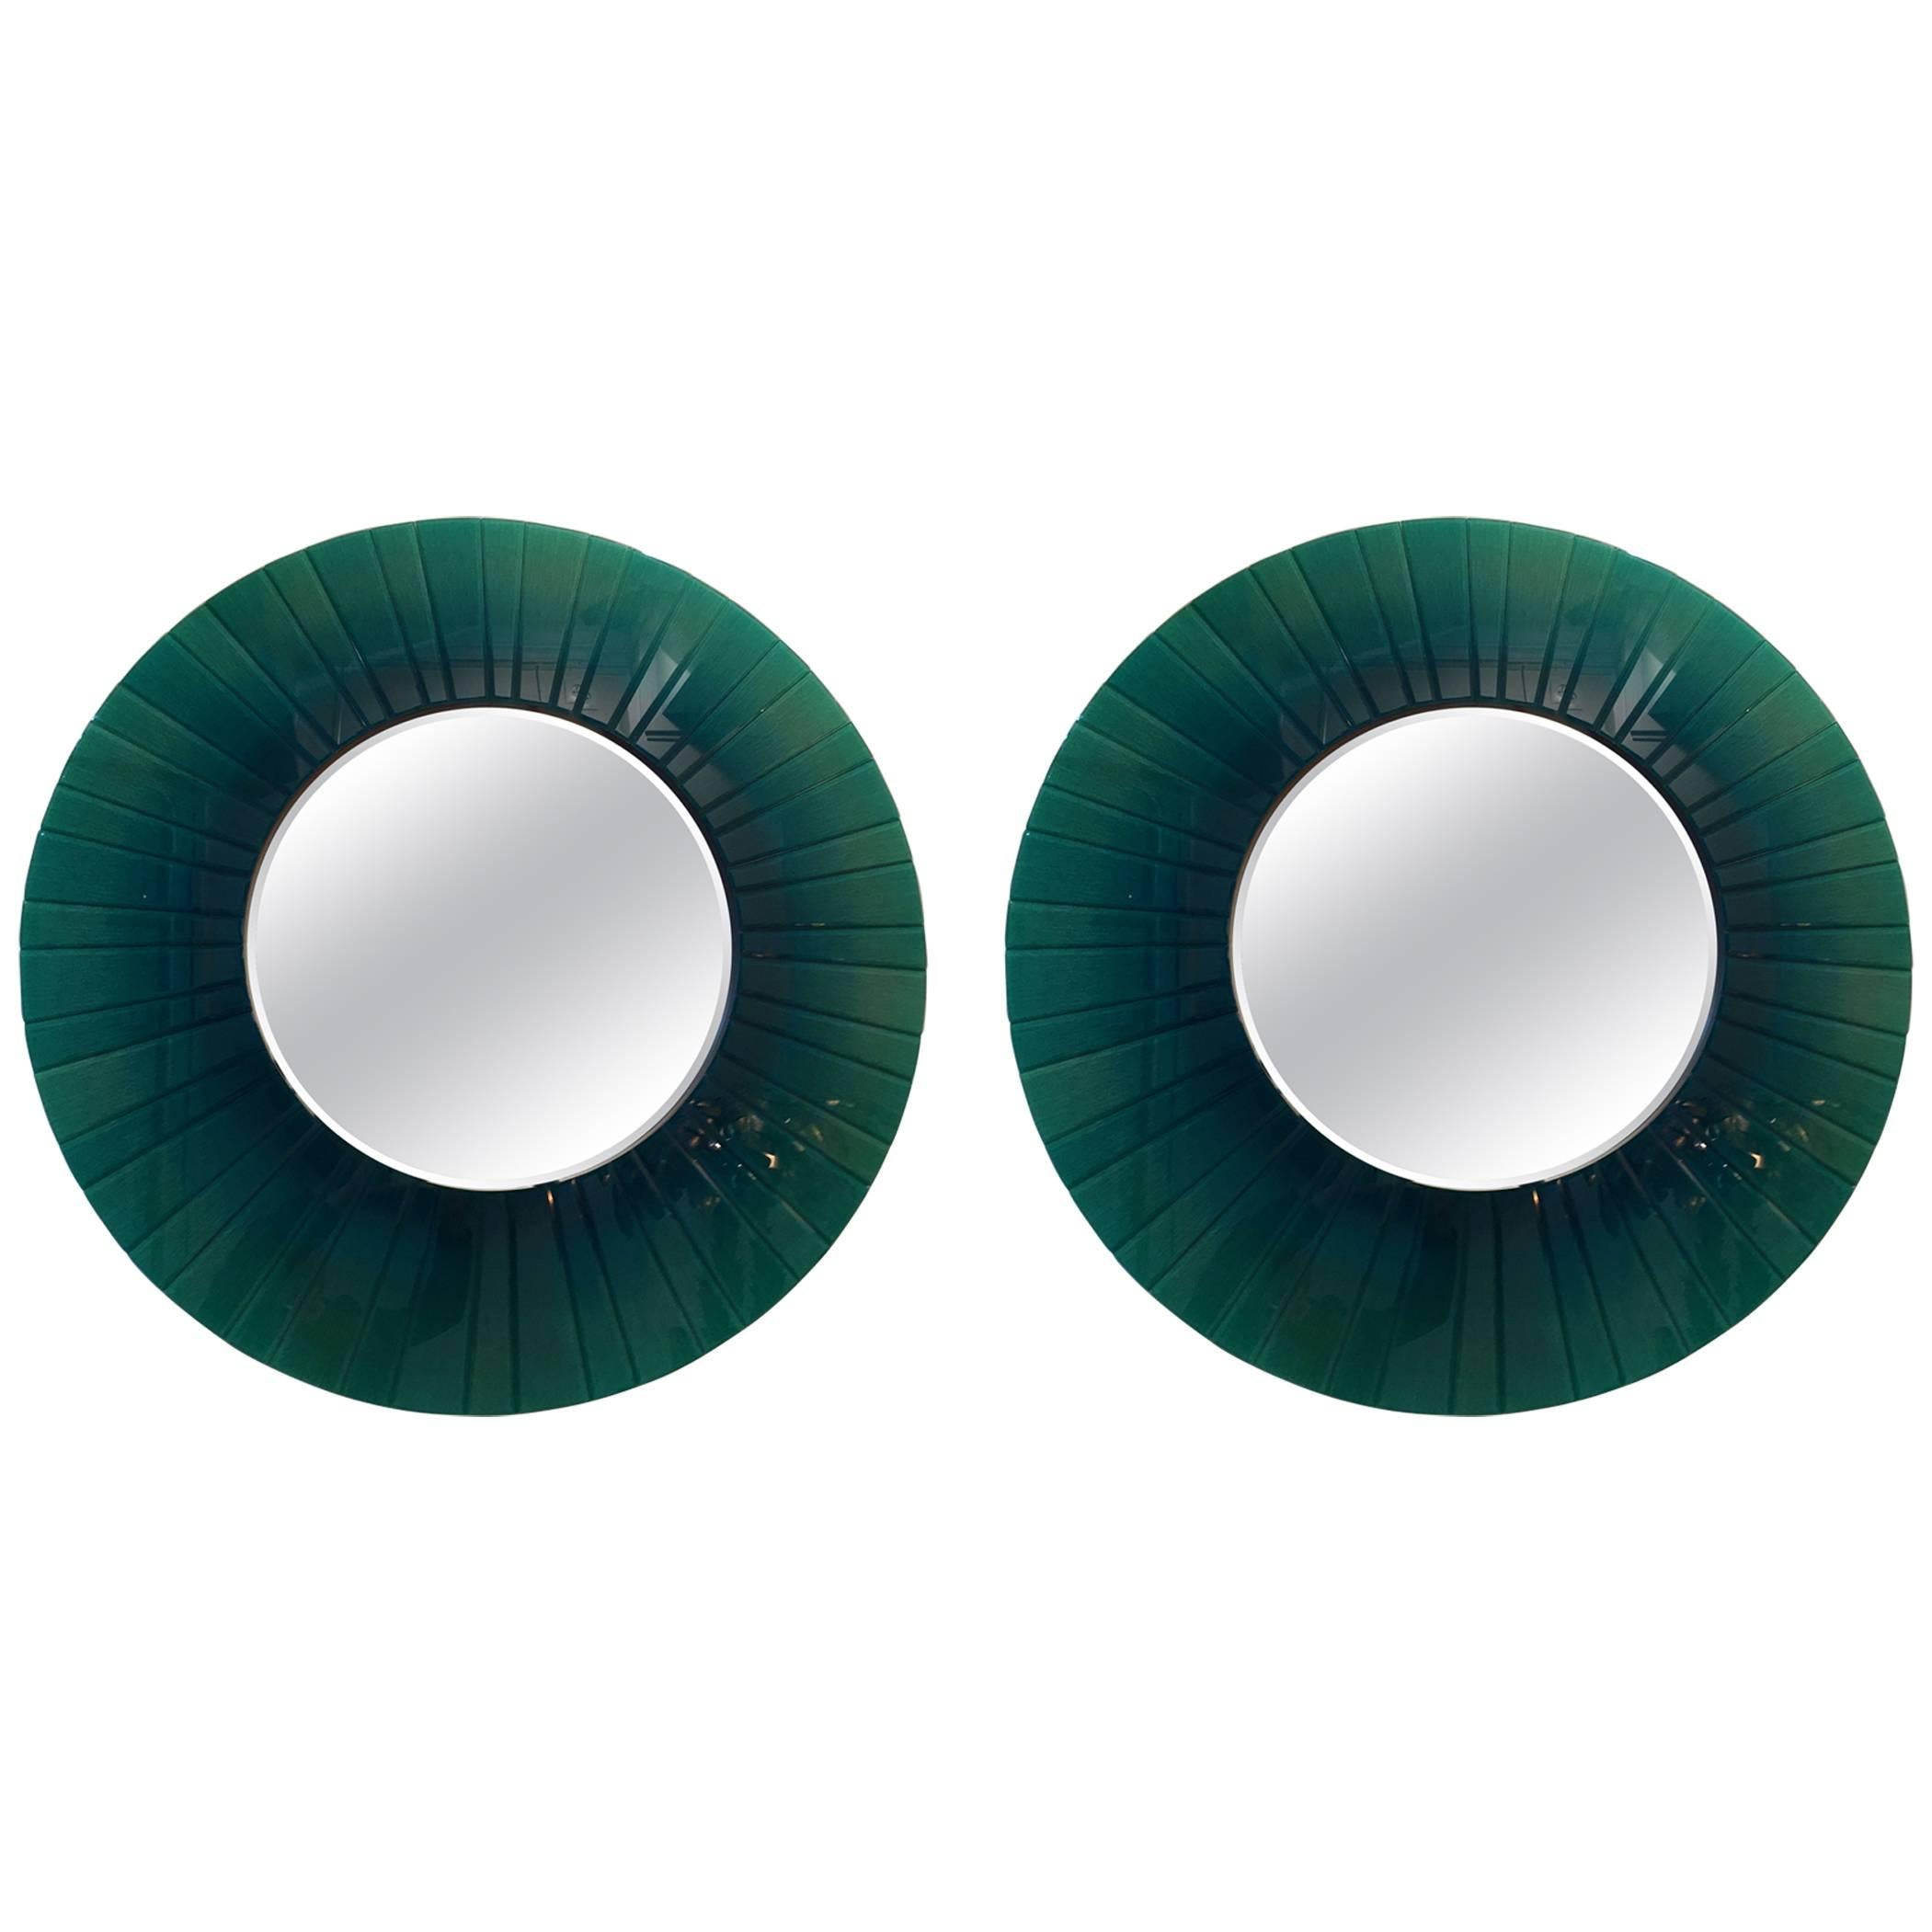 Pair of Large Green Glass Round Mirrors For Sale